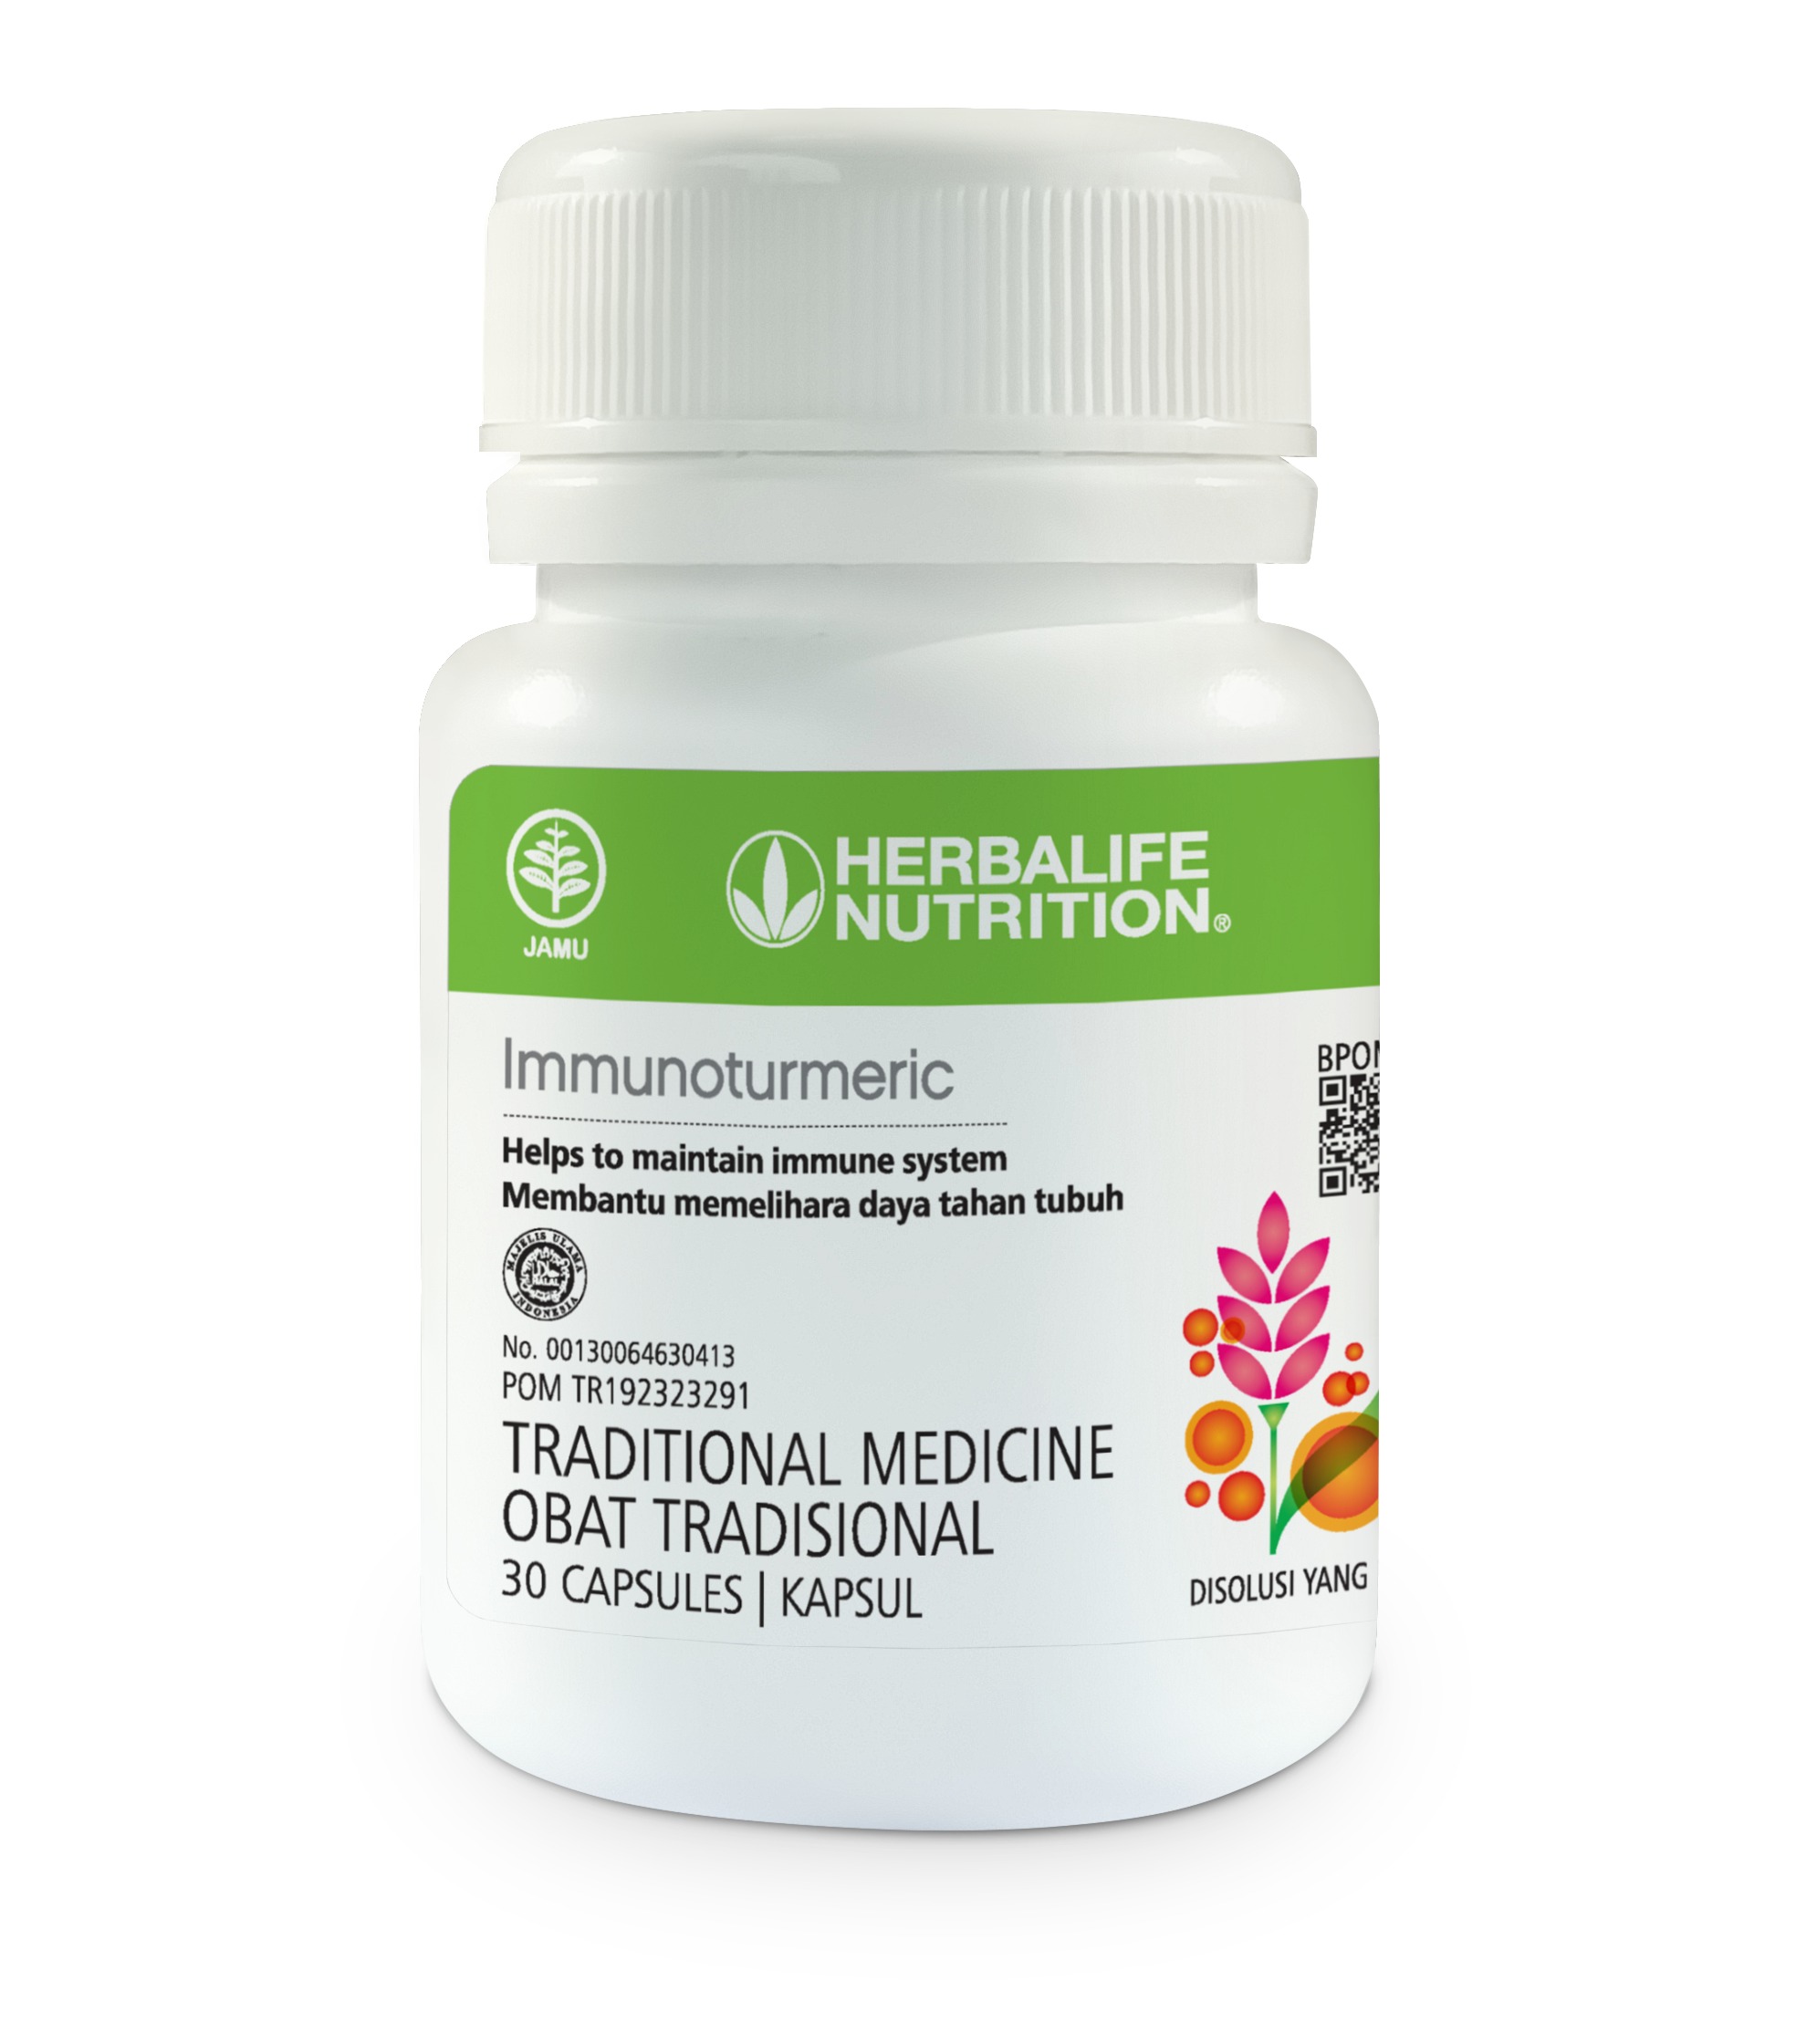 Herbalife Nutrition Launches Immunoturmeric to Strengthen Its Immune Health Product Offering